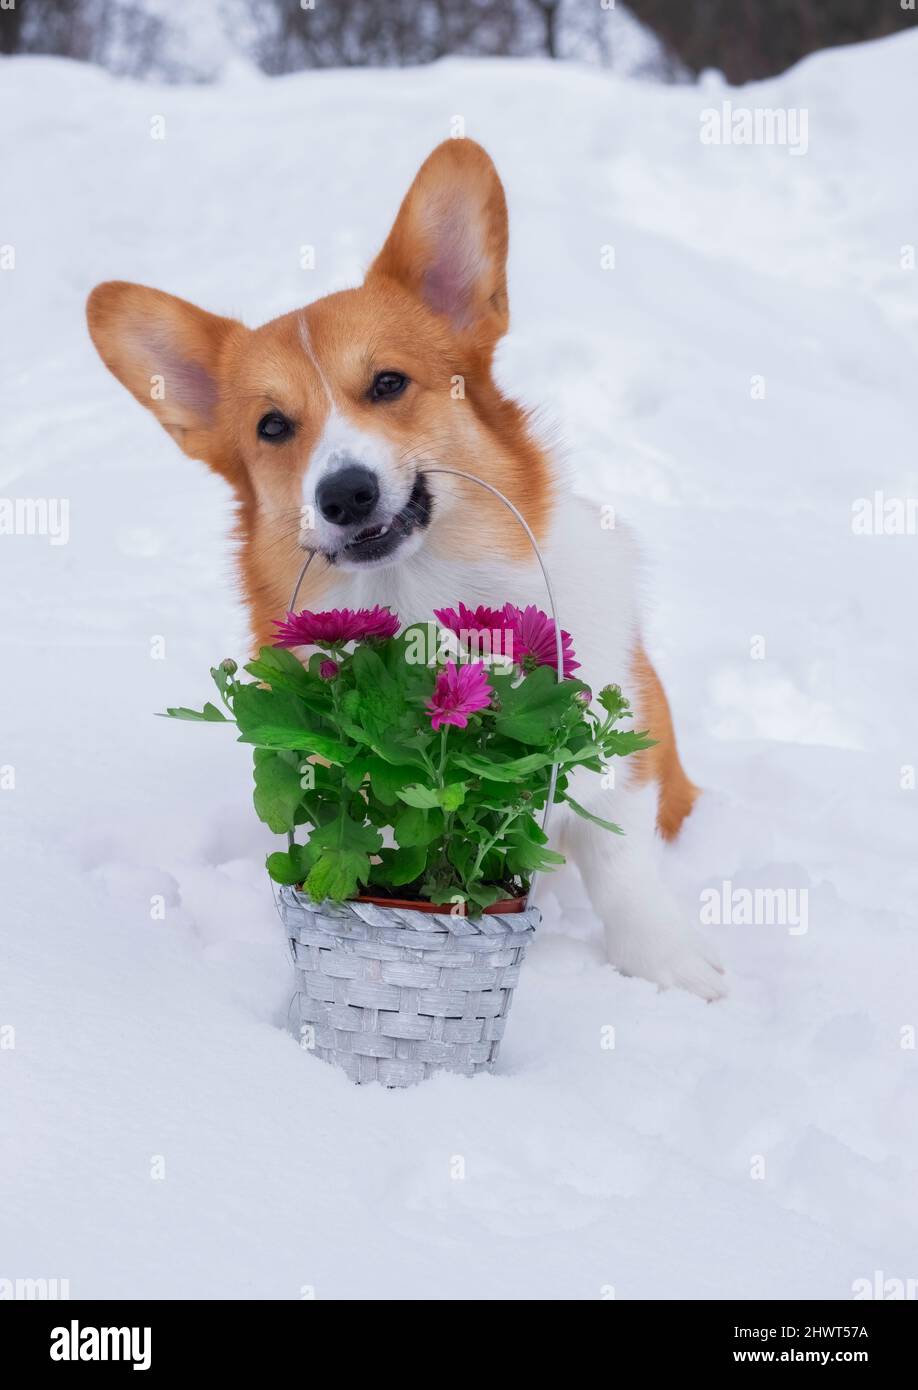 cute dog red welsh corgi pembroke holds in the mouth a basket of flowers on snow. Stock Photo